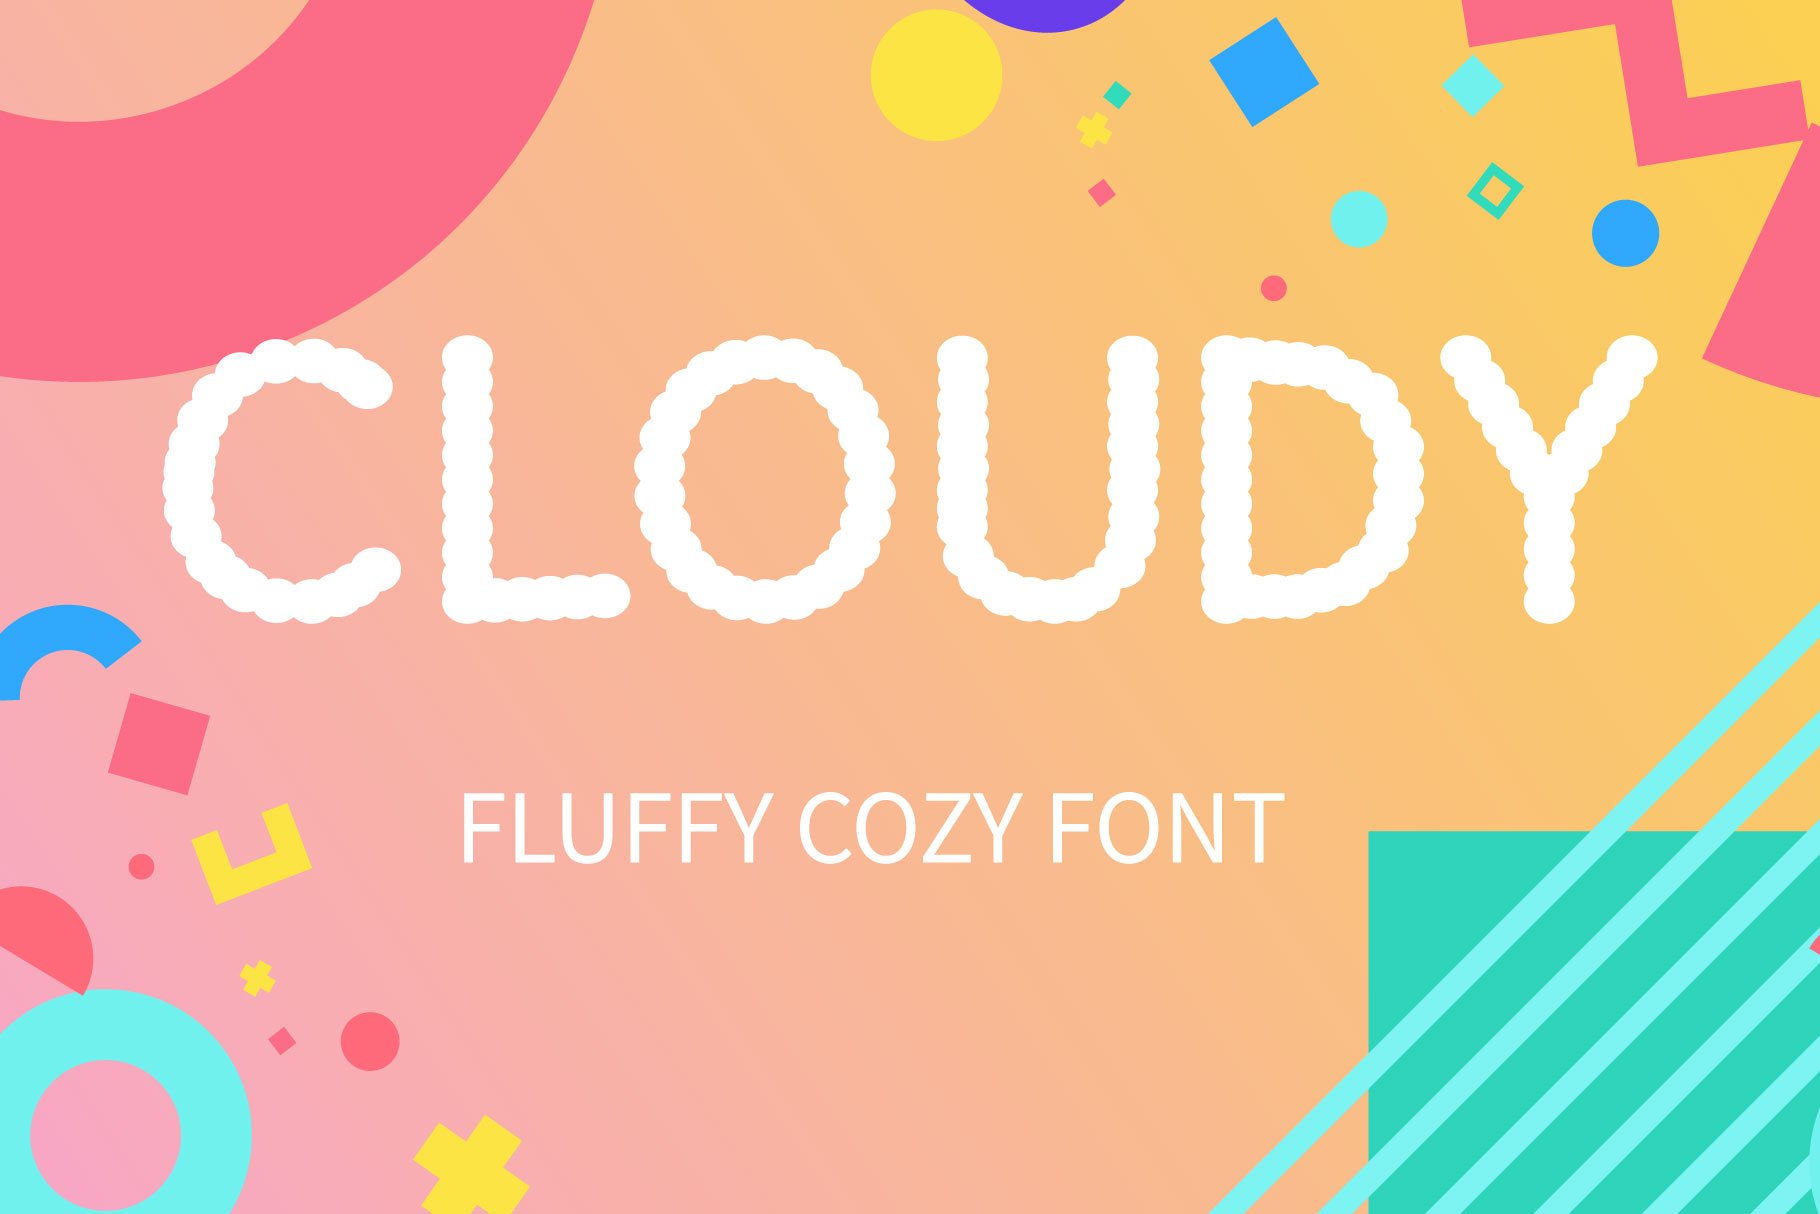 CLOUDY display font cover image.